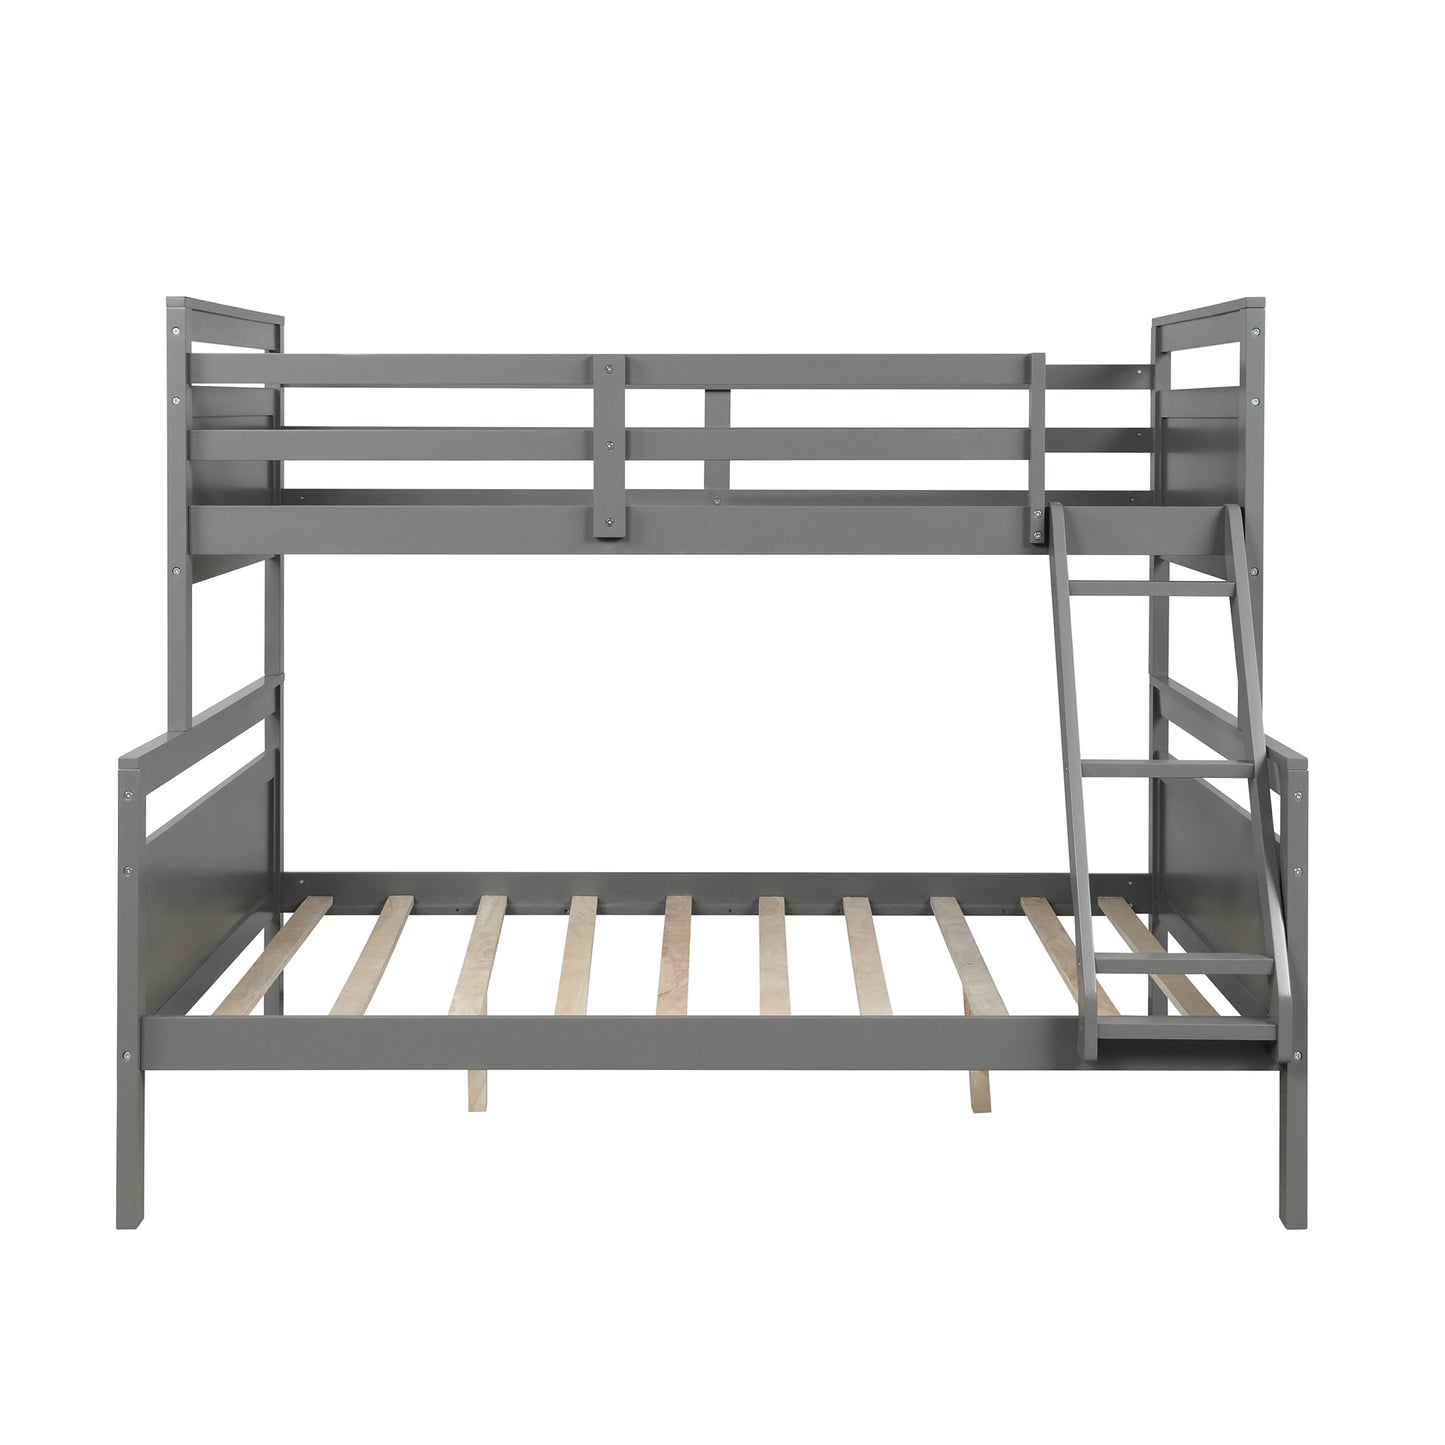 【Pottery Barn】Twin over Full Bunk Bed with Ladder Grey